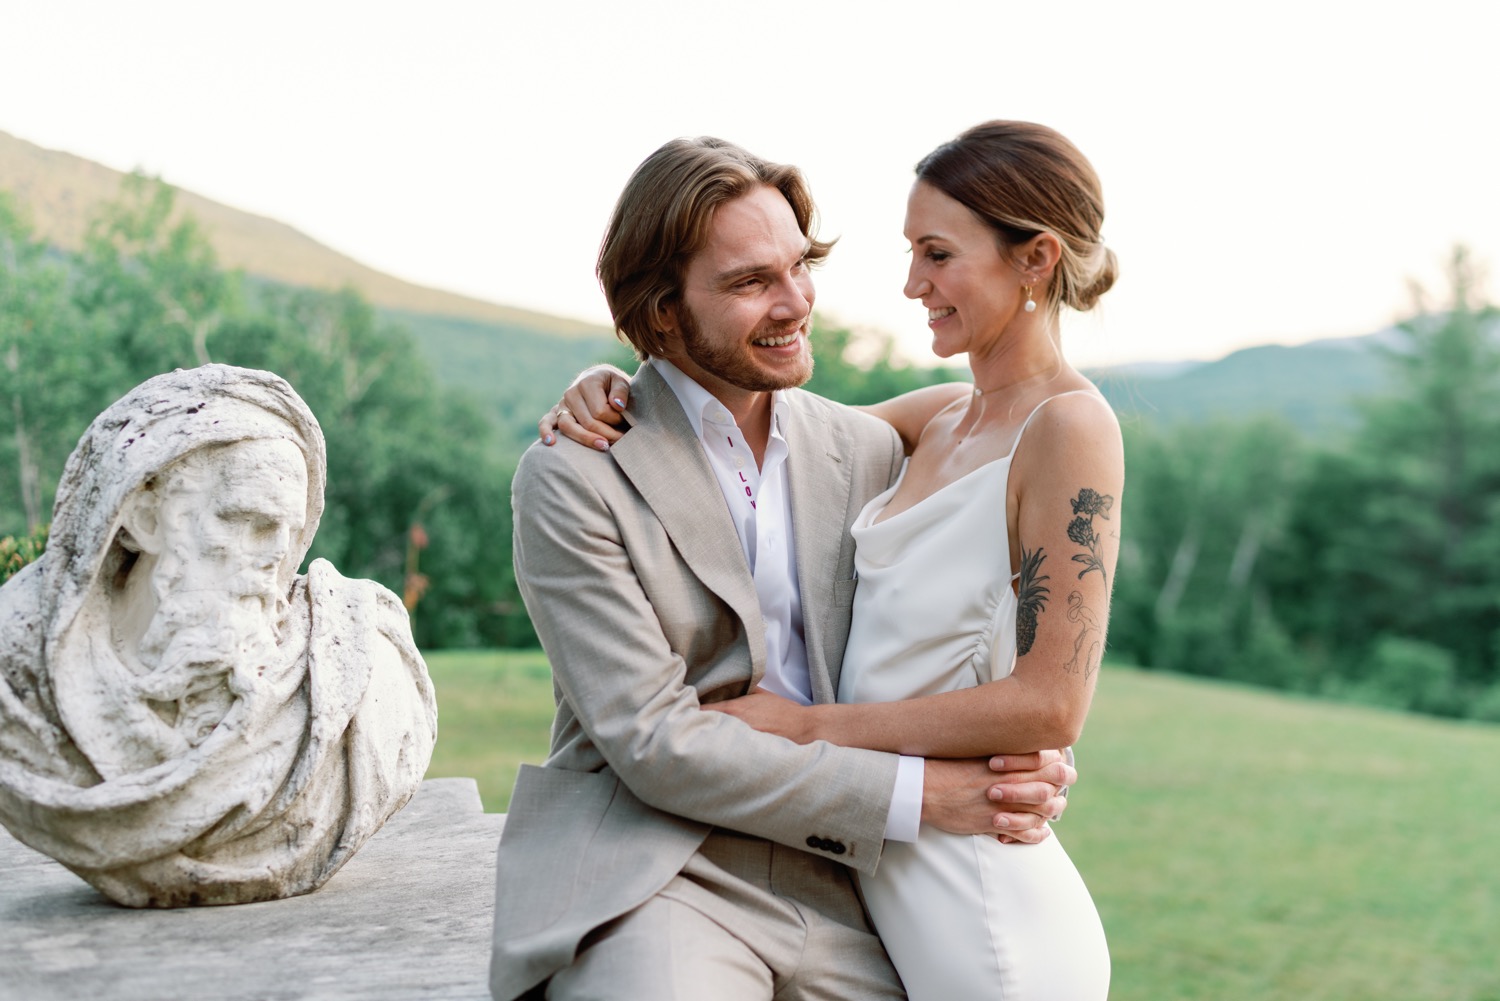 Newlyweds embrace sitting next to bust statue at wilburton Inn manchester vt with silky alexandra grecco gown and groom in pini parma suit unique wedding idea